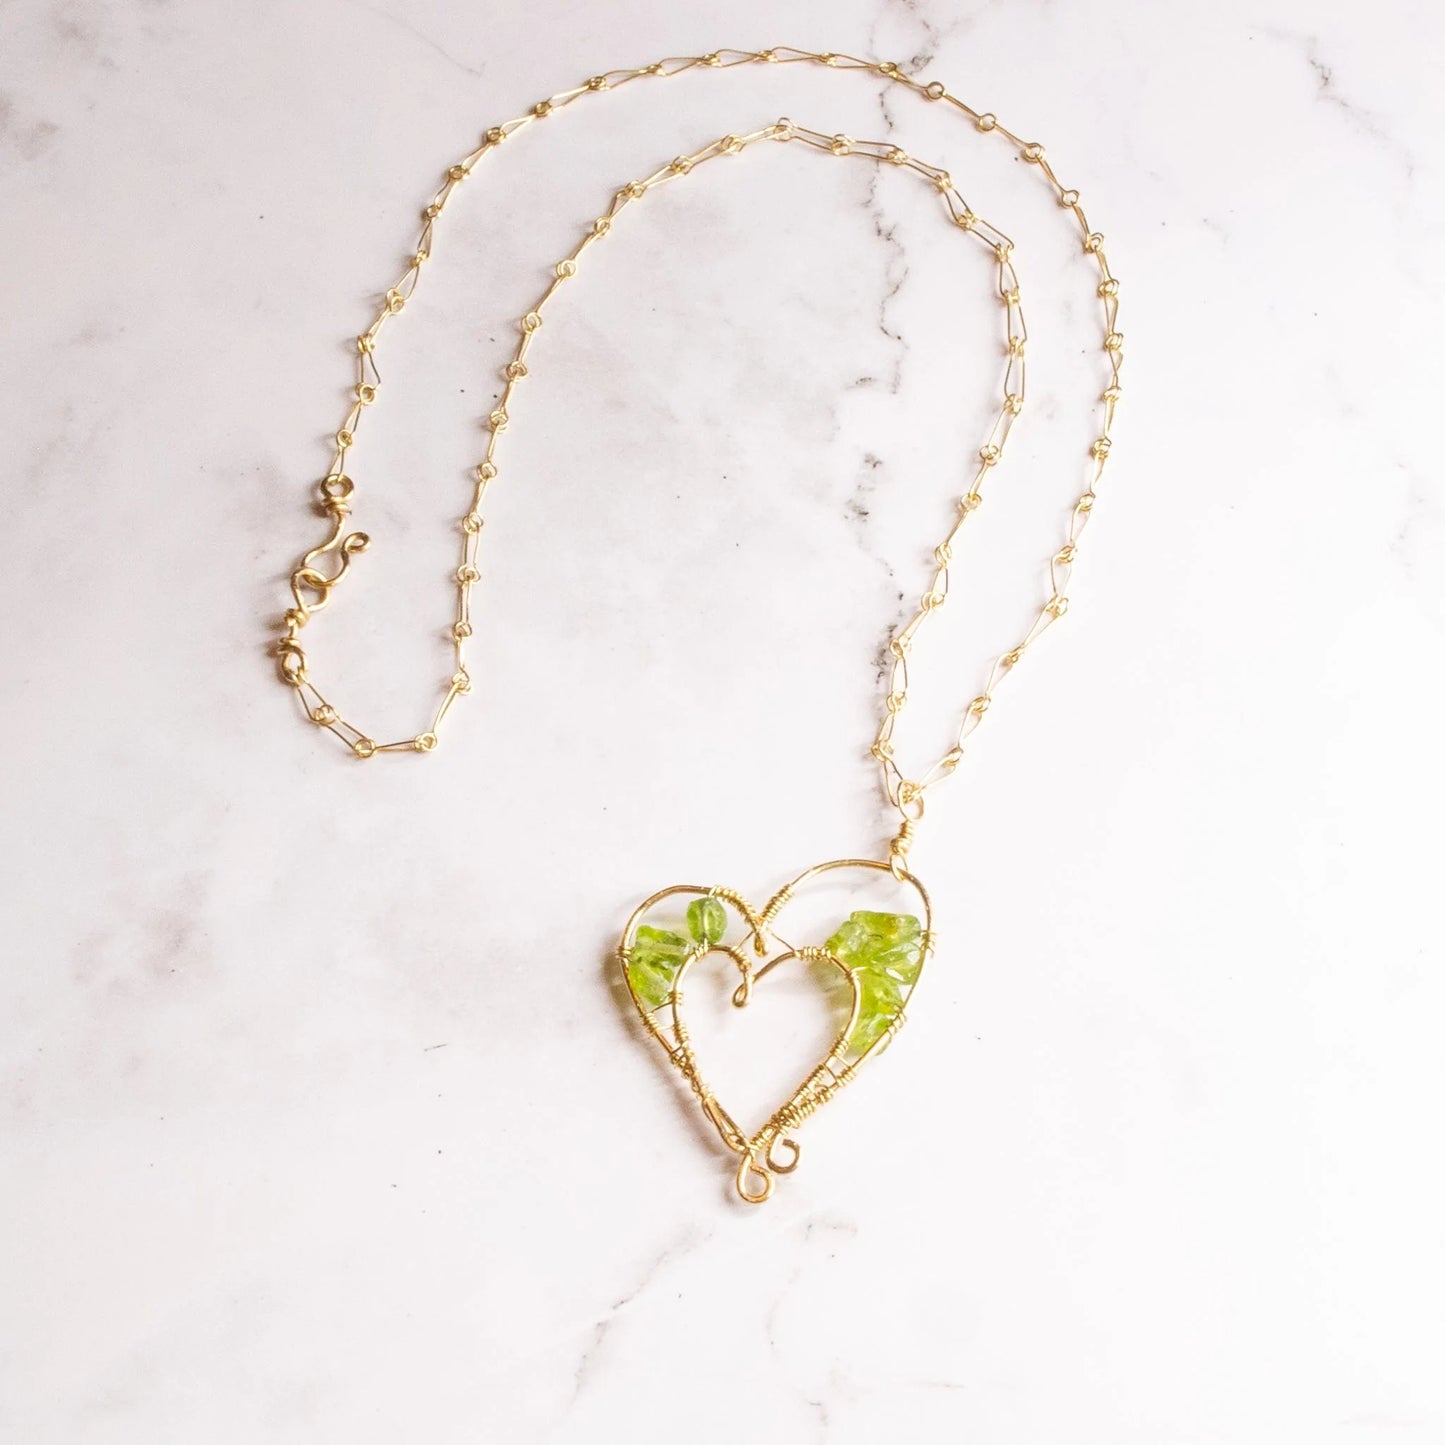 Cheekoo's Handcrafted Double Heart Tree of Life Peridot Gold Necklace - August Birthstone